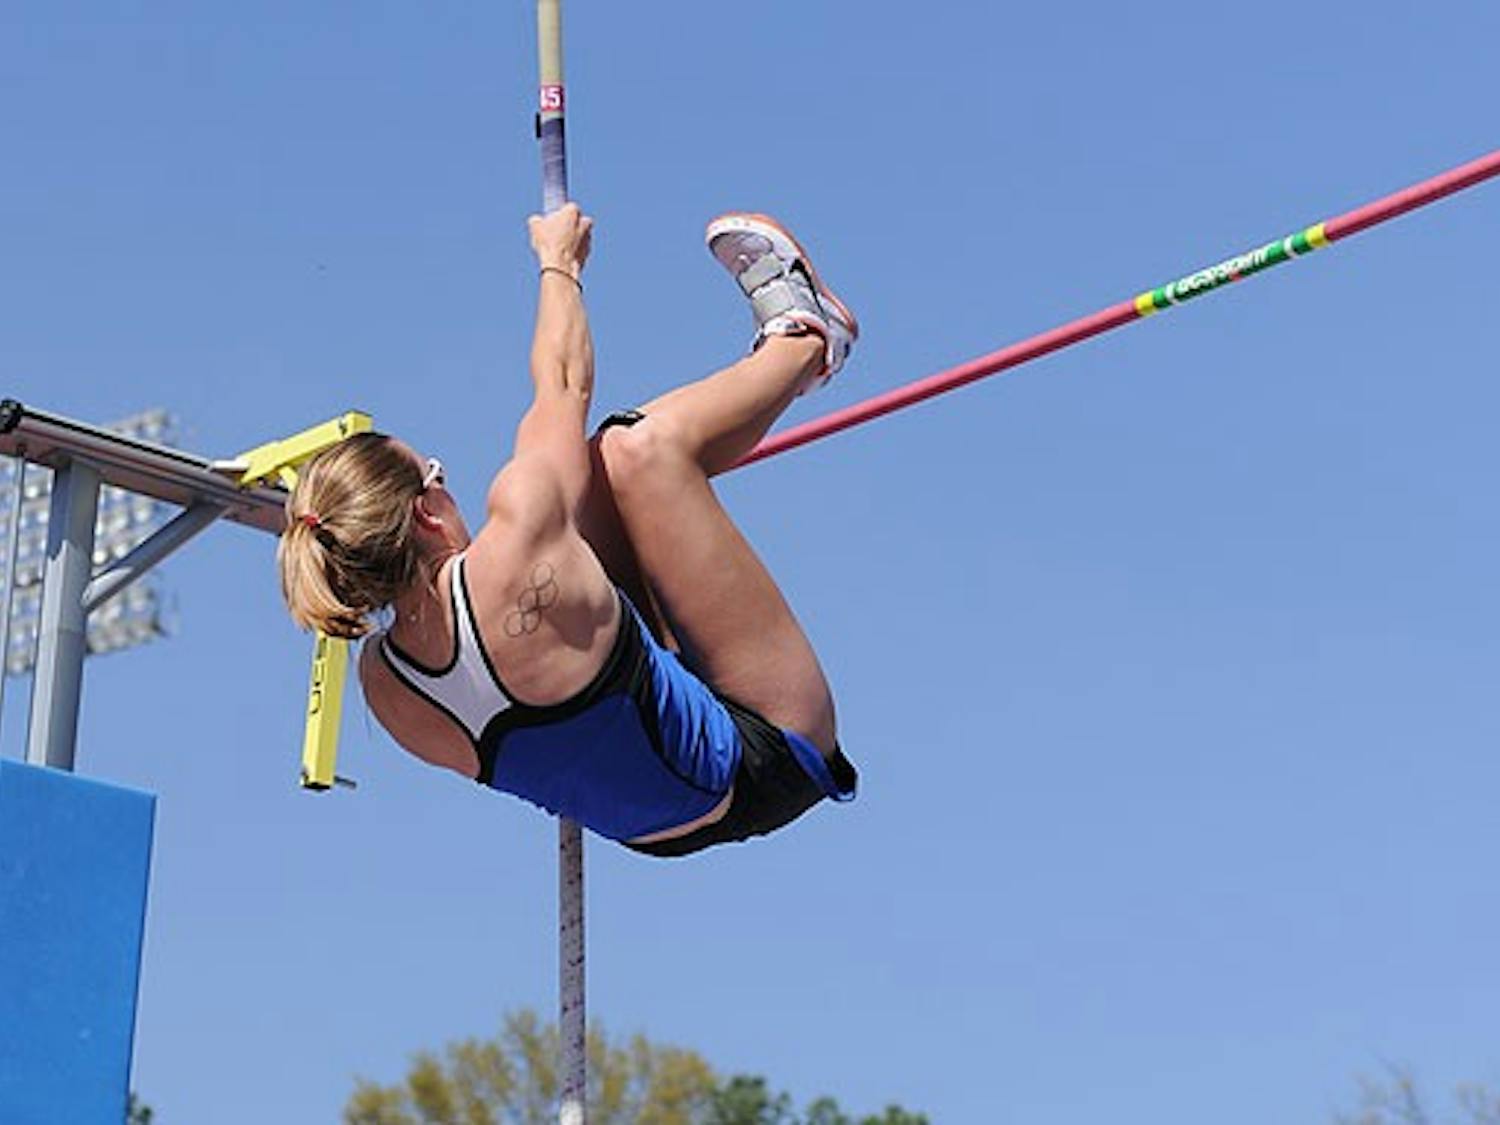 Junior Amy Fryt defended her 2009 win in the pole vault with a jump of 13 feet, 1.5 inches at the ACC Outdoor Championships in Clemson.